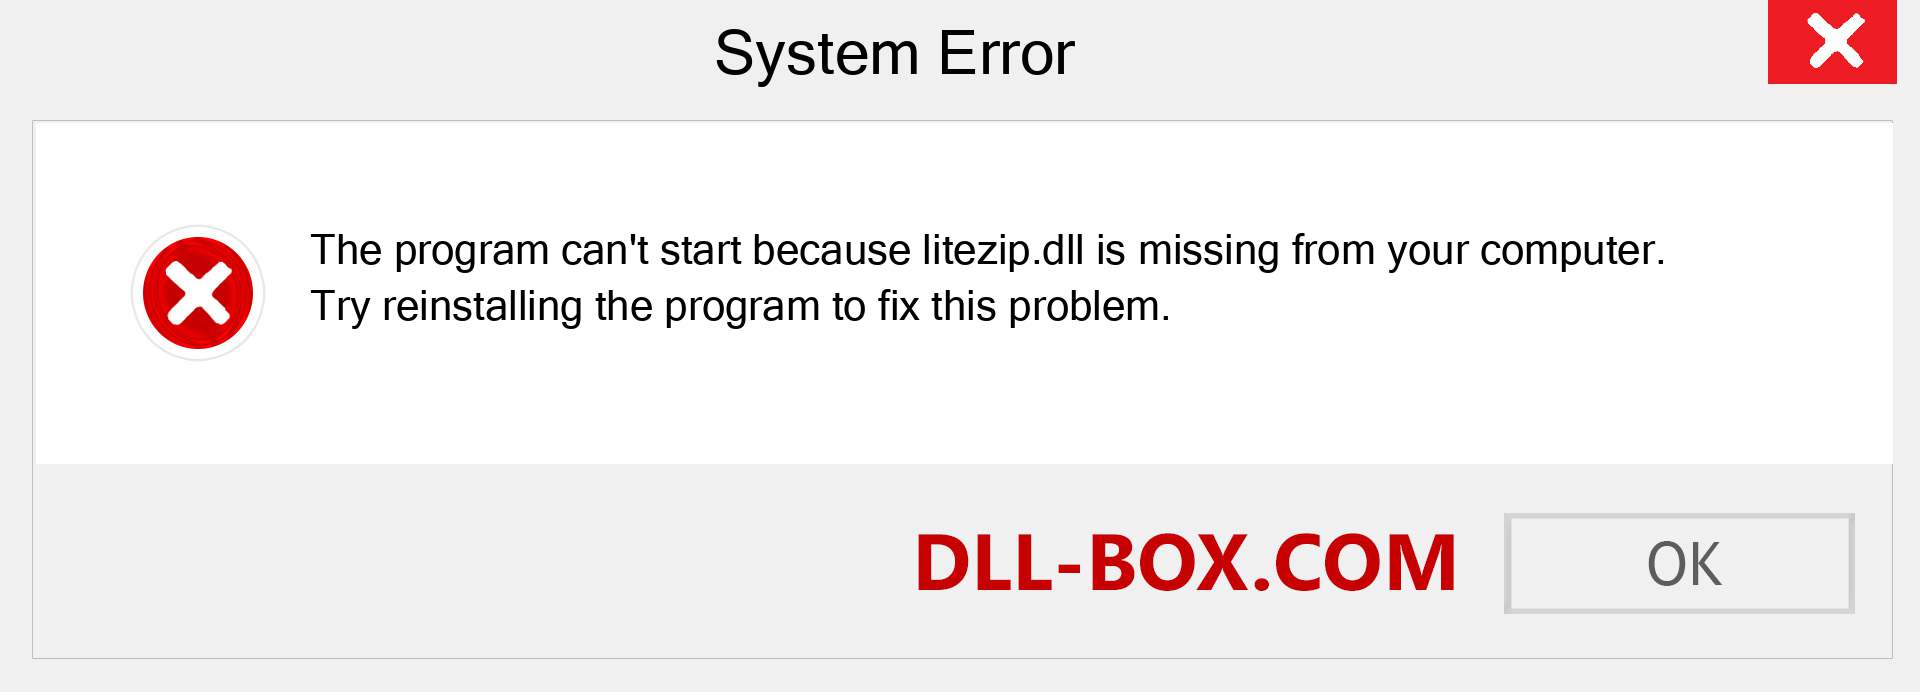  litezip.dll file is missing?. Download for Windows 7, 8, 10 - Fix  litezip dll Missing Error on Windows, photos, images